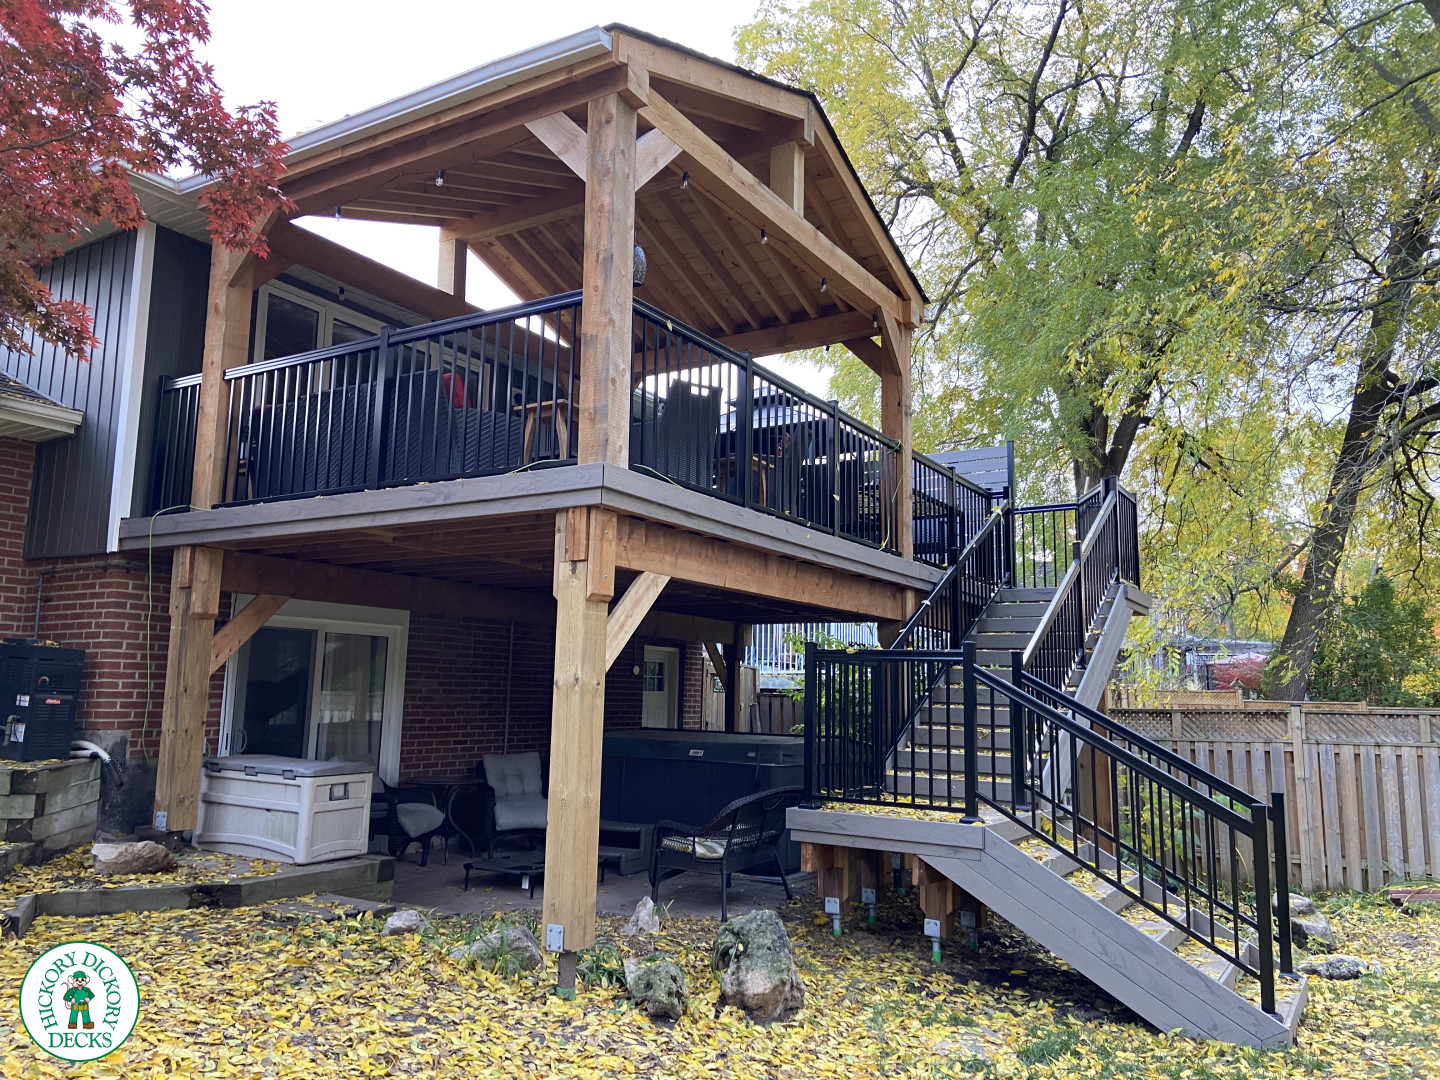 Mid-high deck brown TruNorth deck with lighting in steps and black aluminum railing all around.